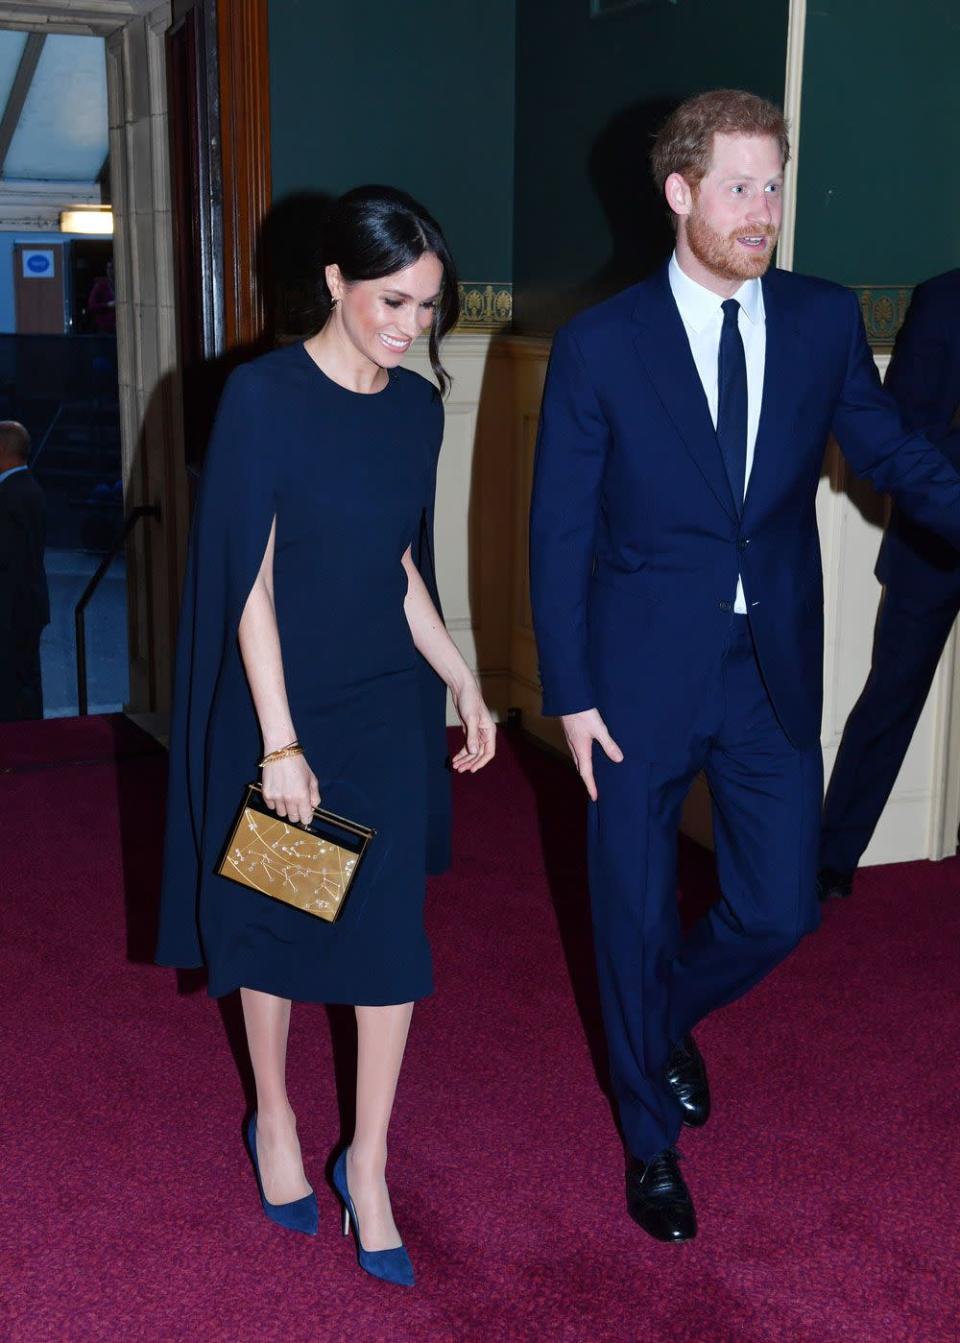 <p>Not all superheroes wear capes, as Meghan proved when she arrived at the Queen's birthday party in this stunning navy Stella McCartney design. </p>